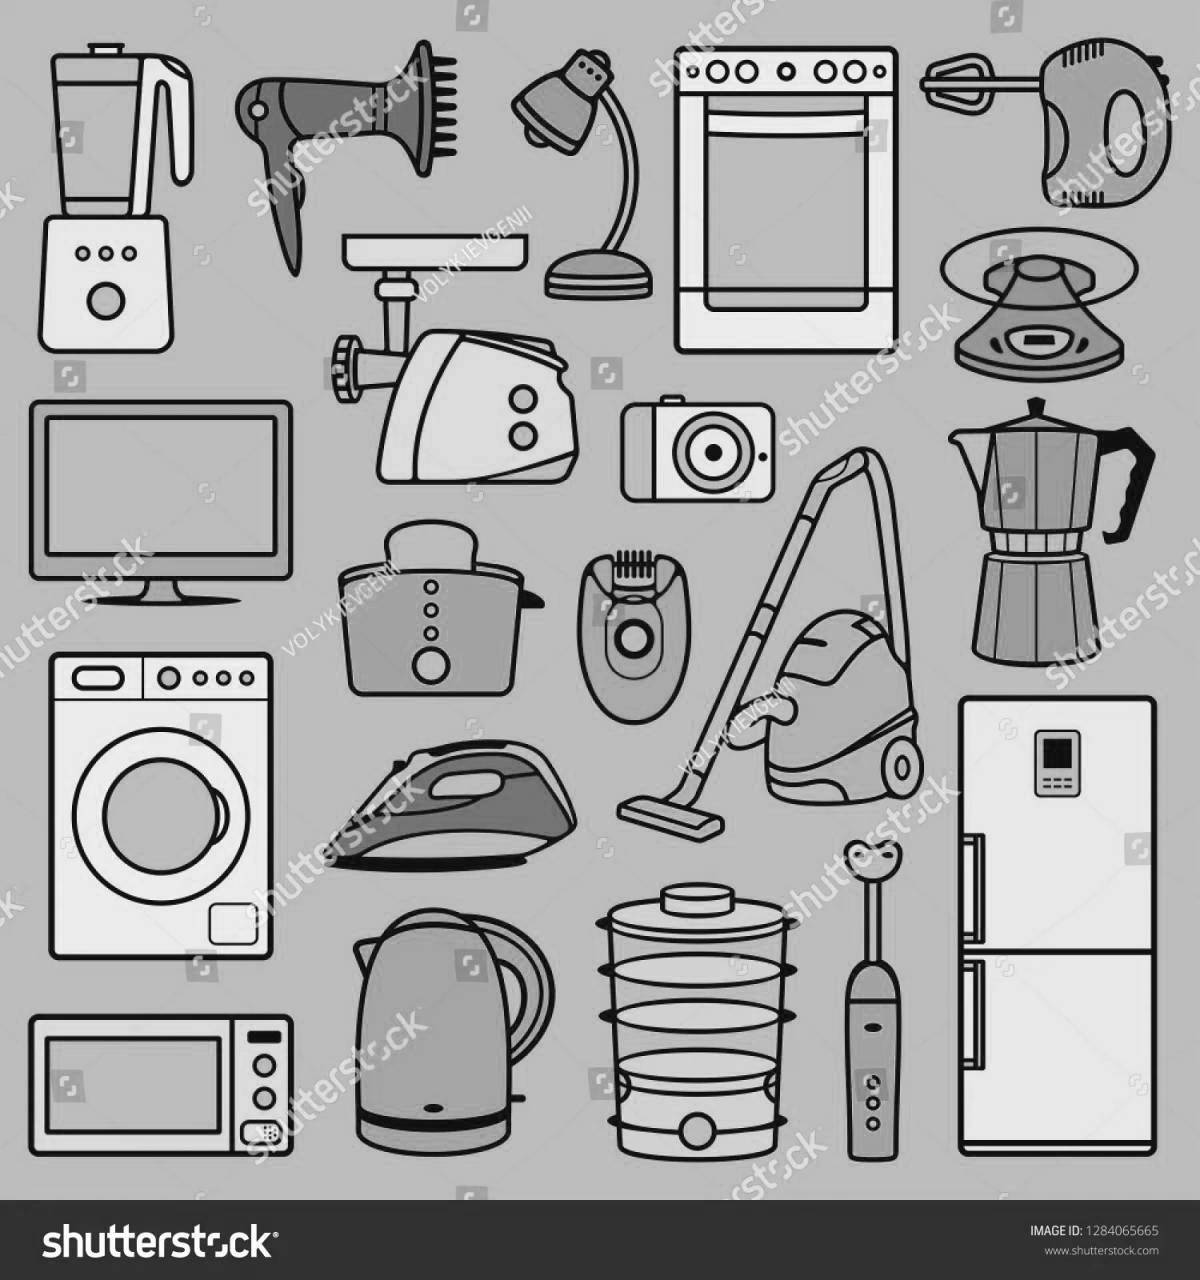 Cute coloring of household appliances